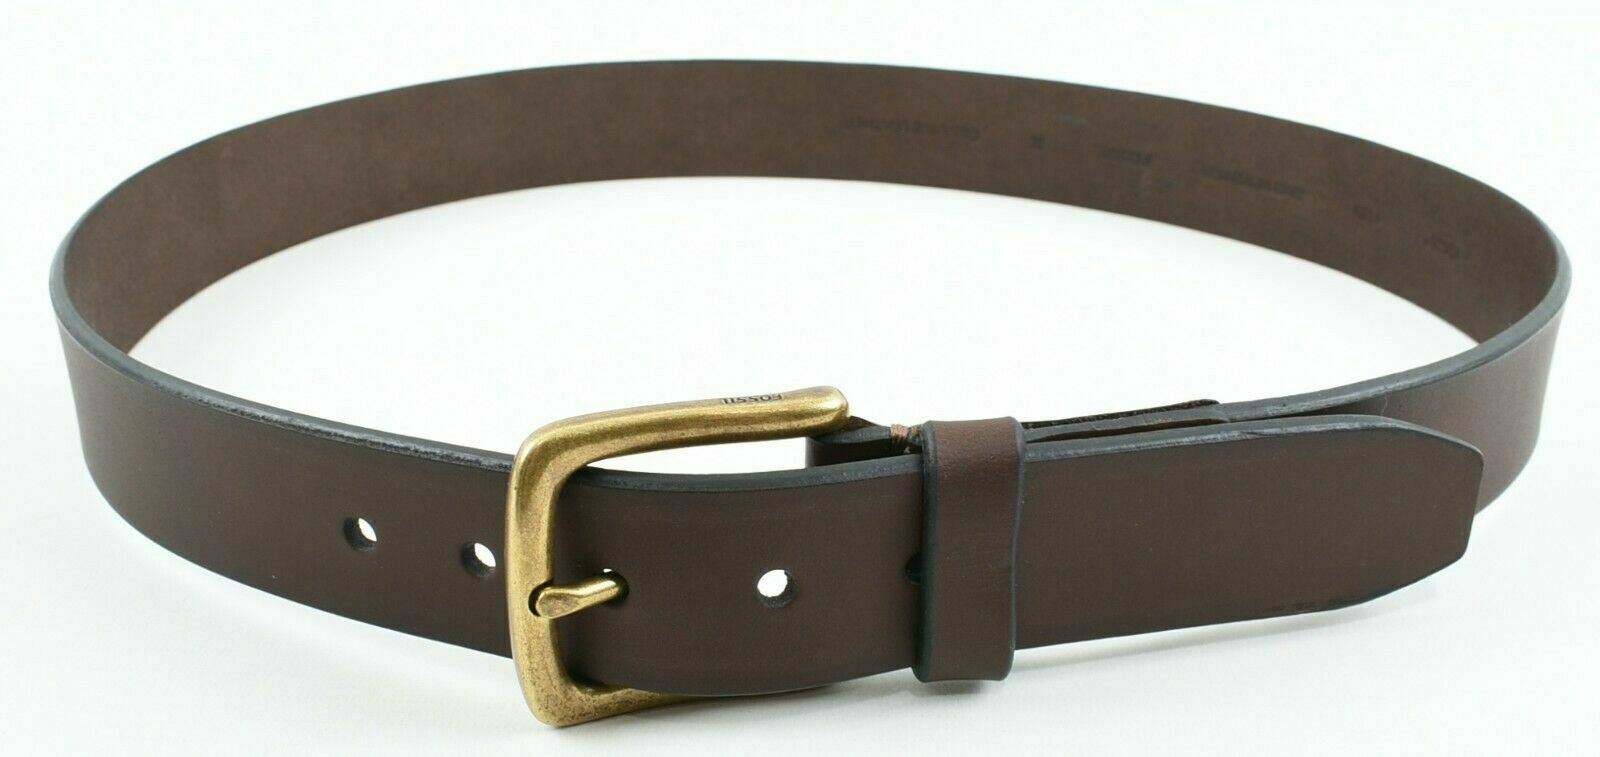 FOSSIL Men's COLE Genuine Leather Brown Belt, Reversible, size W38